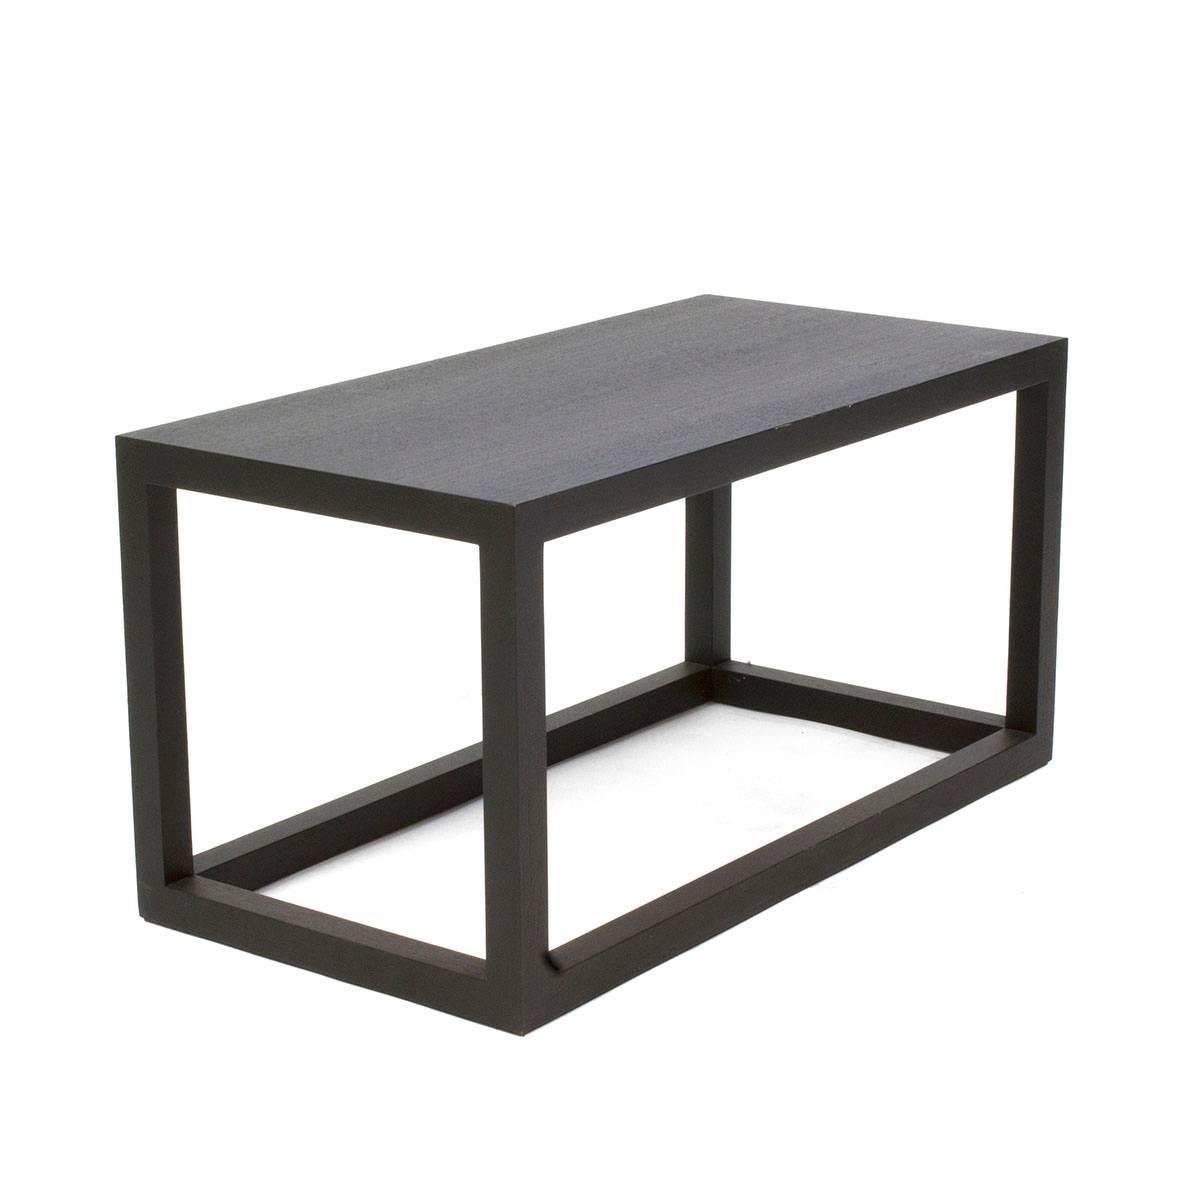 Side low table in dark stained oak, designed by Piero Lissoni for Cassina. 261 31